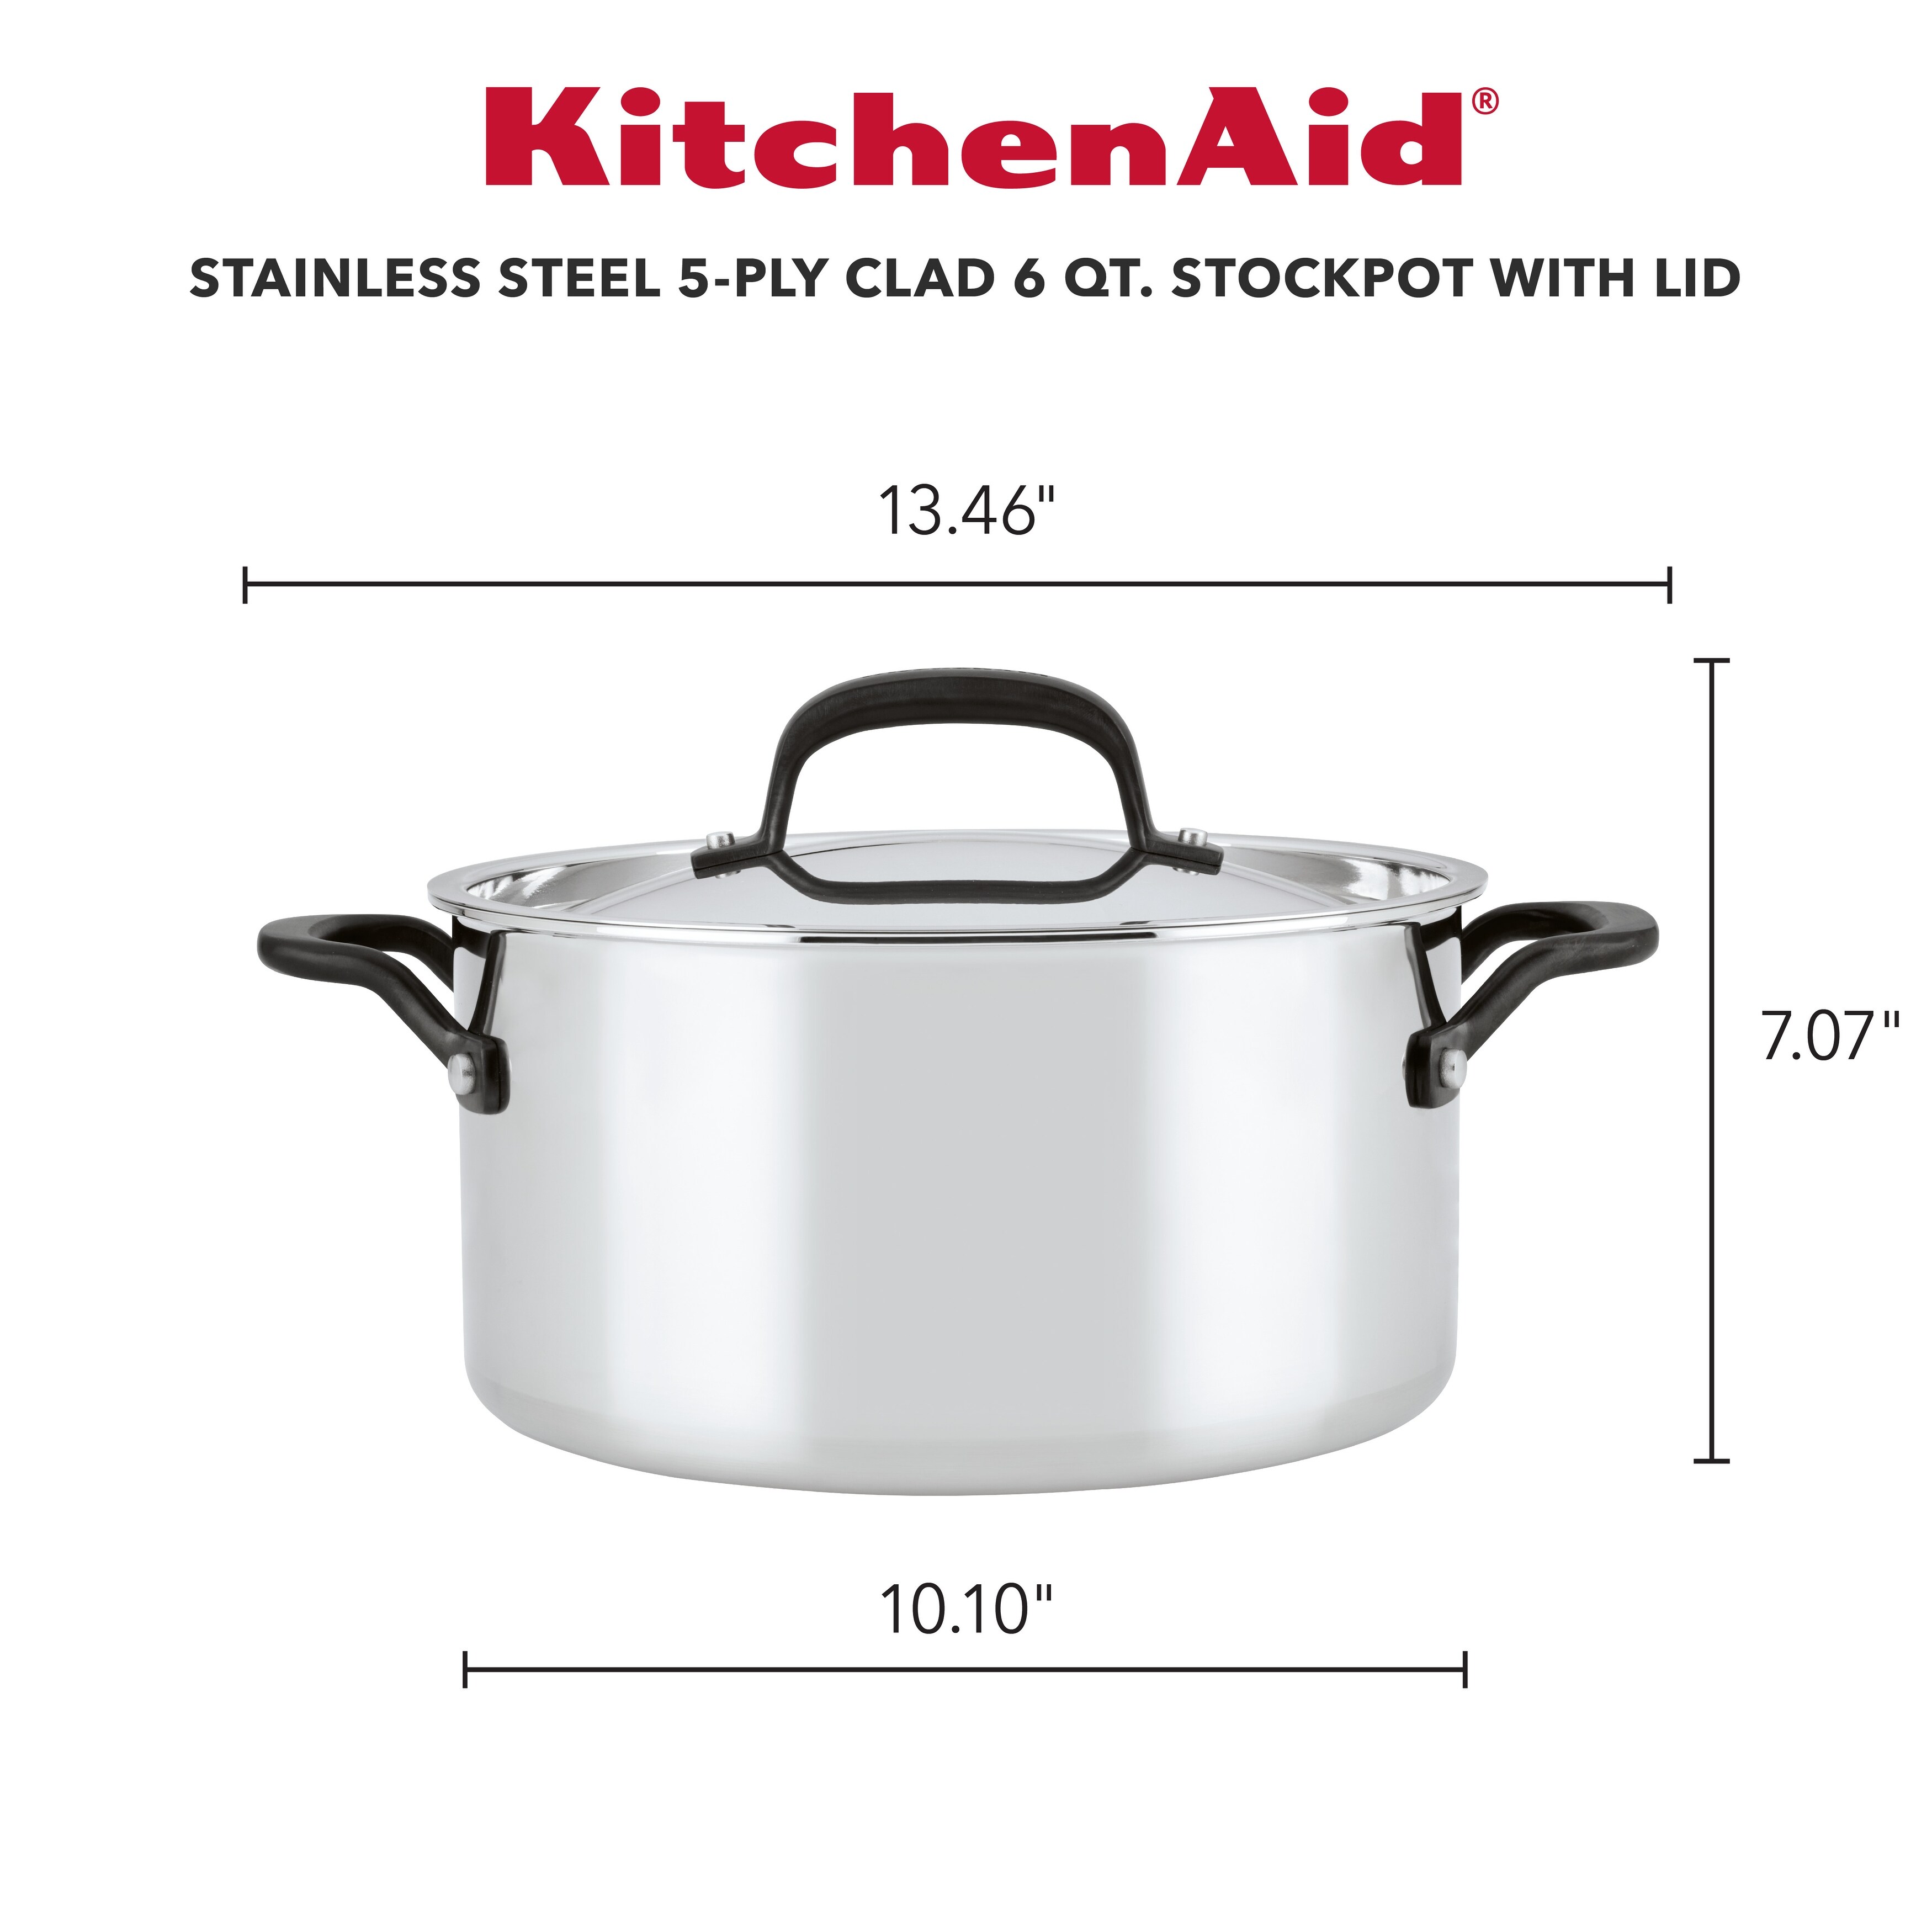 KitchenAid 5-Ply Clad Stainless Steel Induction Stockpot with Lid · 6 QT ·  Polished Stainless Steel